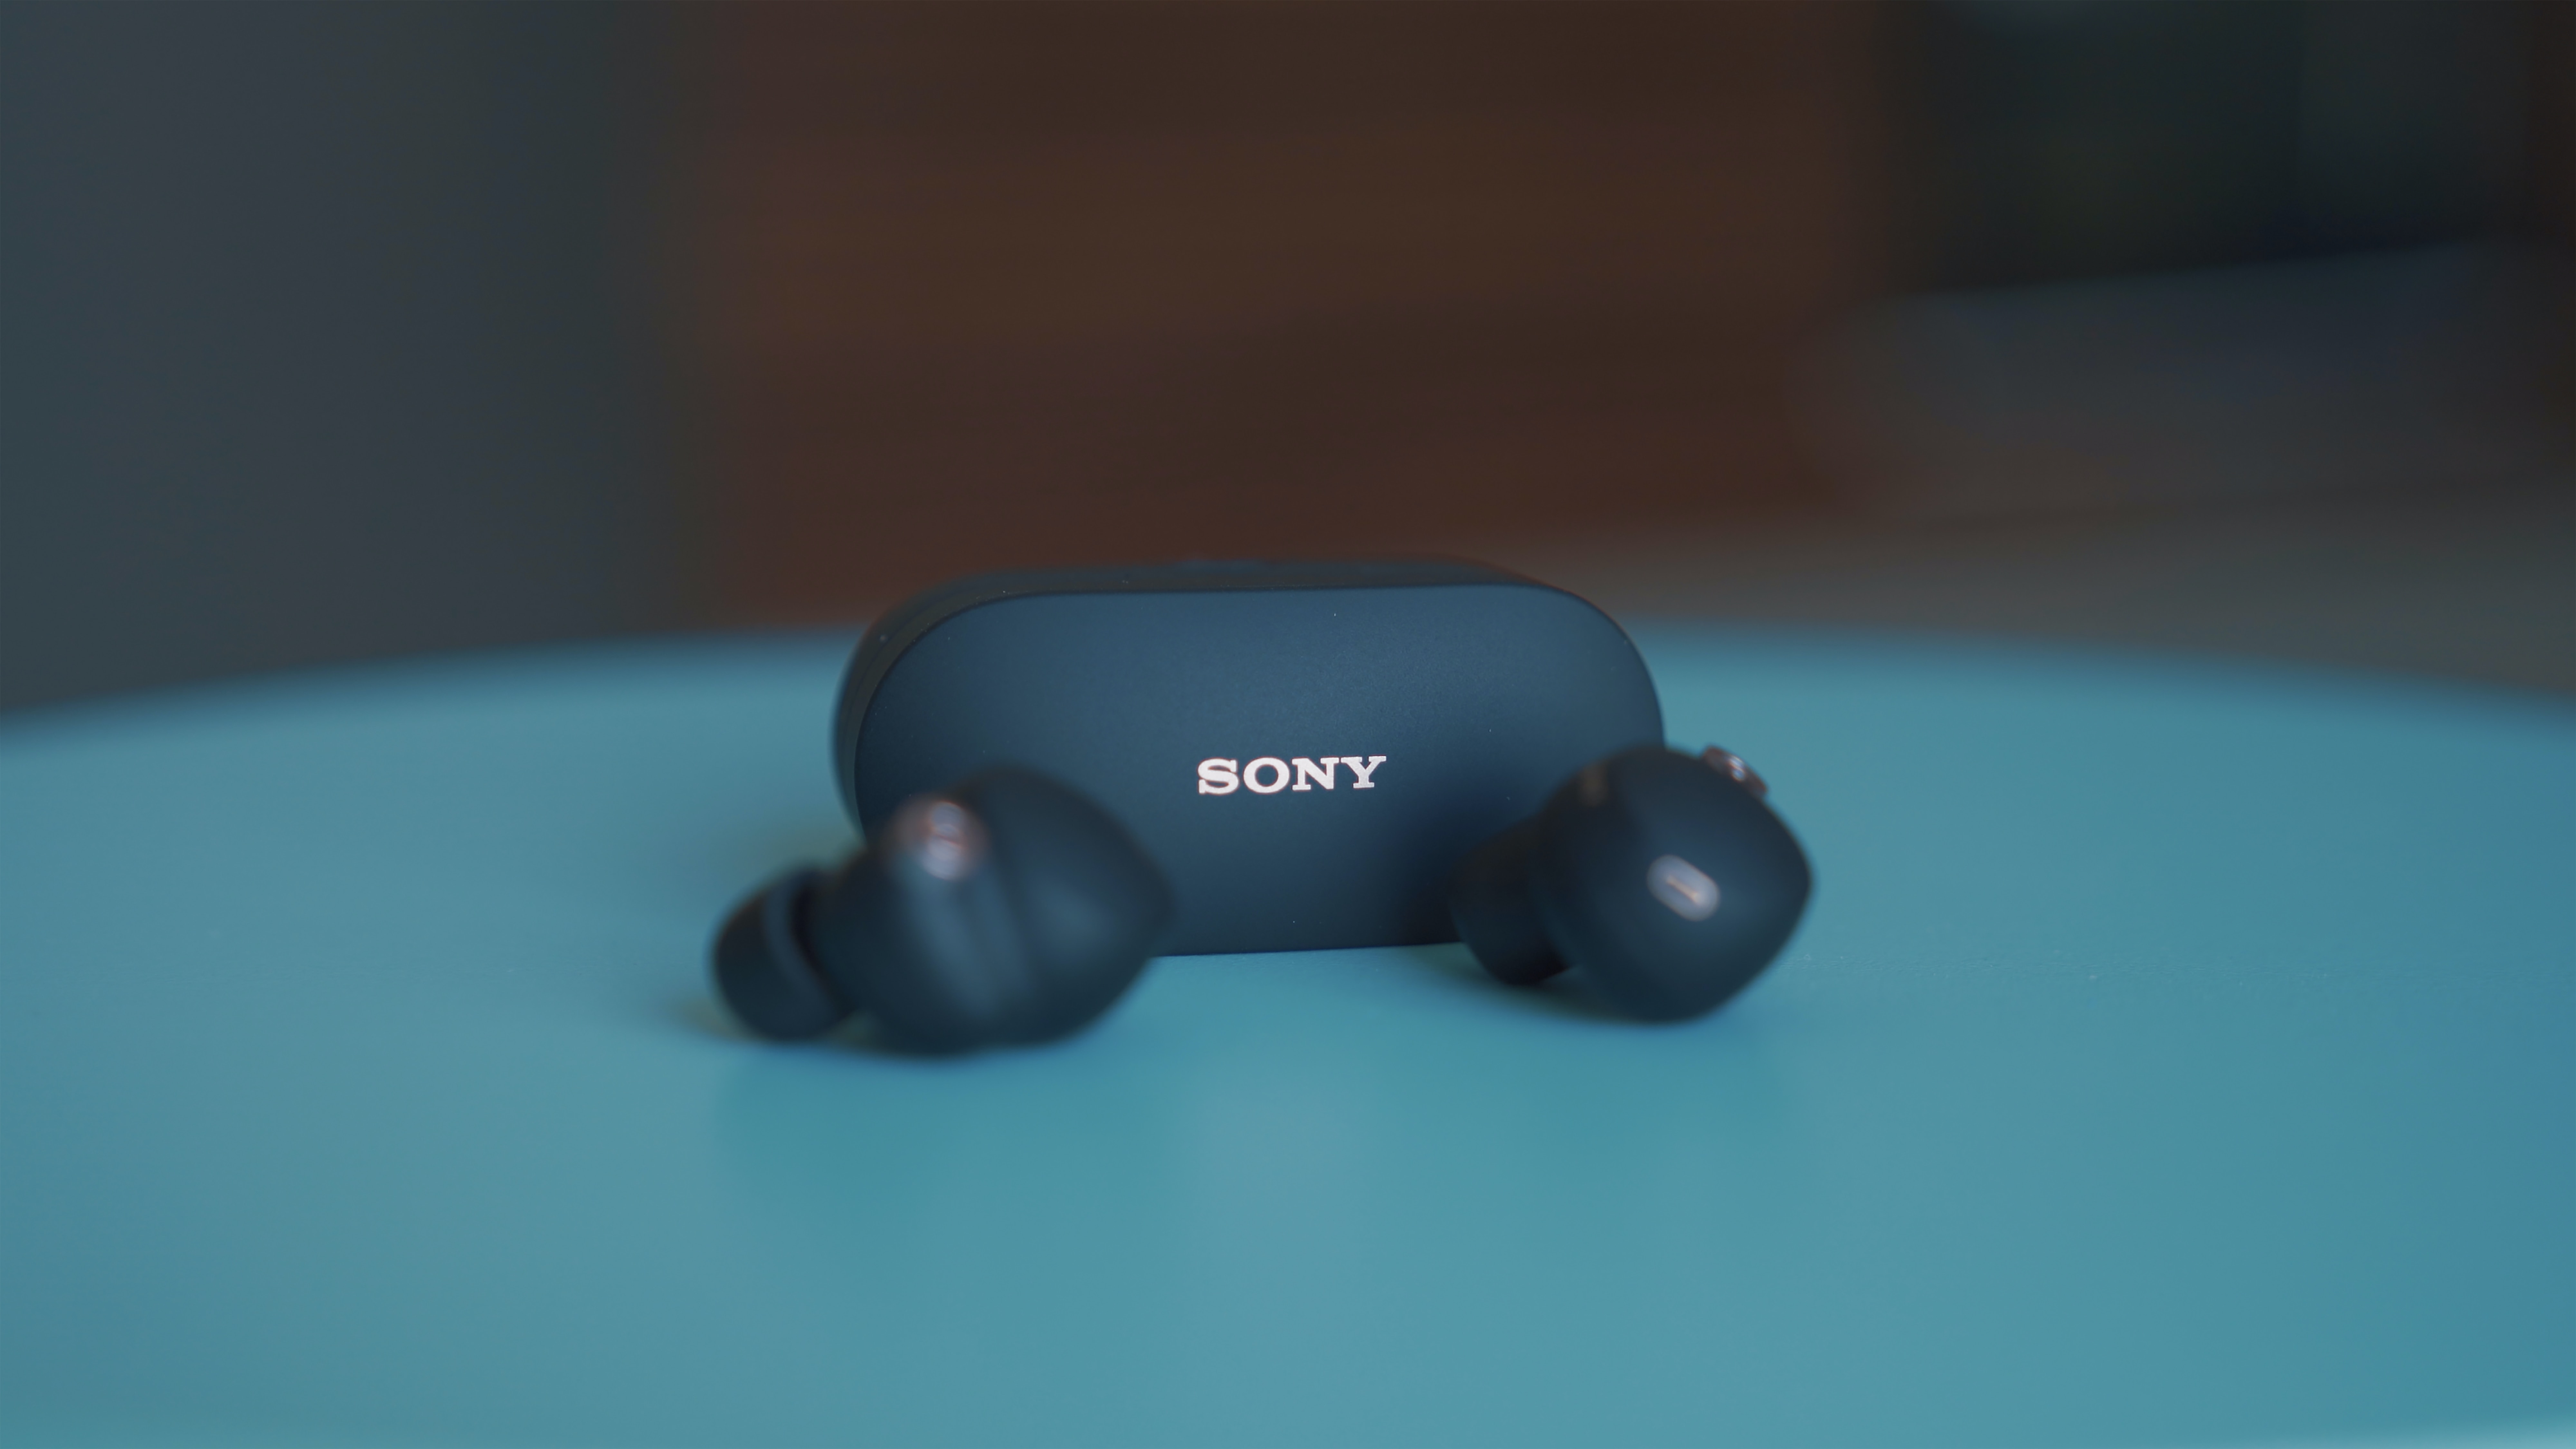 sony-wireless-earbuds-how-to-pair